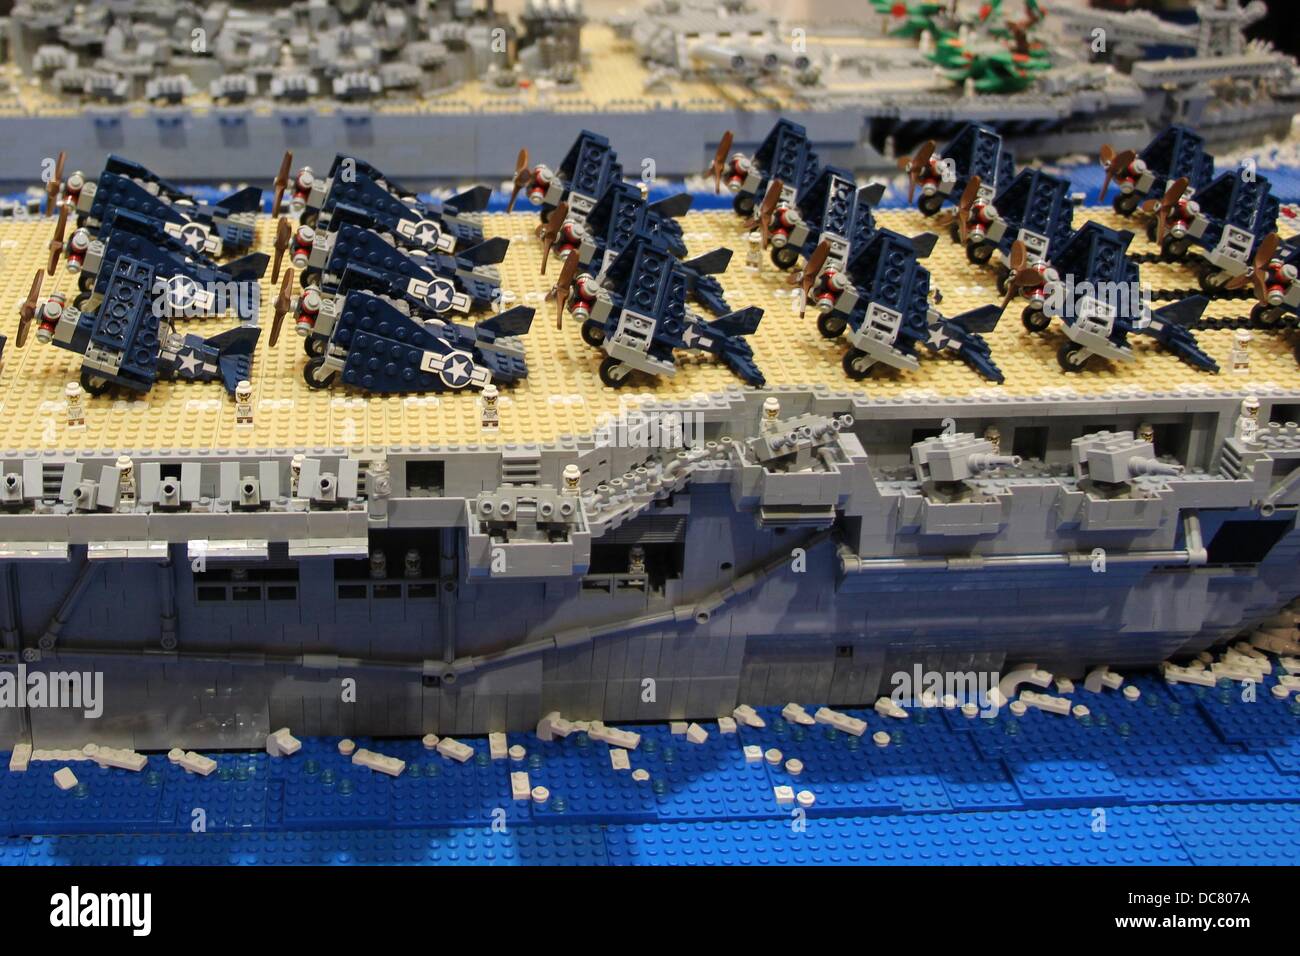 Santa Clara Convention Center, California USA 11th August, 2013 Bricks By The Bay annual Lego convention promotes creativity. World War II USS Yorktown CV10 (Essex class) aircraft carrier by Marcello De Cicco. Over 26,000 Lego bricks, weighs 76 pounds, 8 feet 6 inches long, 21 inches tall and 18 inches wide, separates into 4 sections, took 2 years 3 months to build. August 11, 2013 Credit: Lisa Werner/Alamy Live News Stock Photo